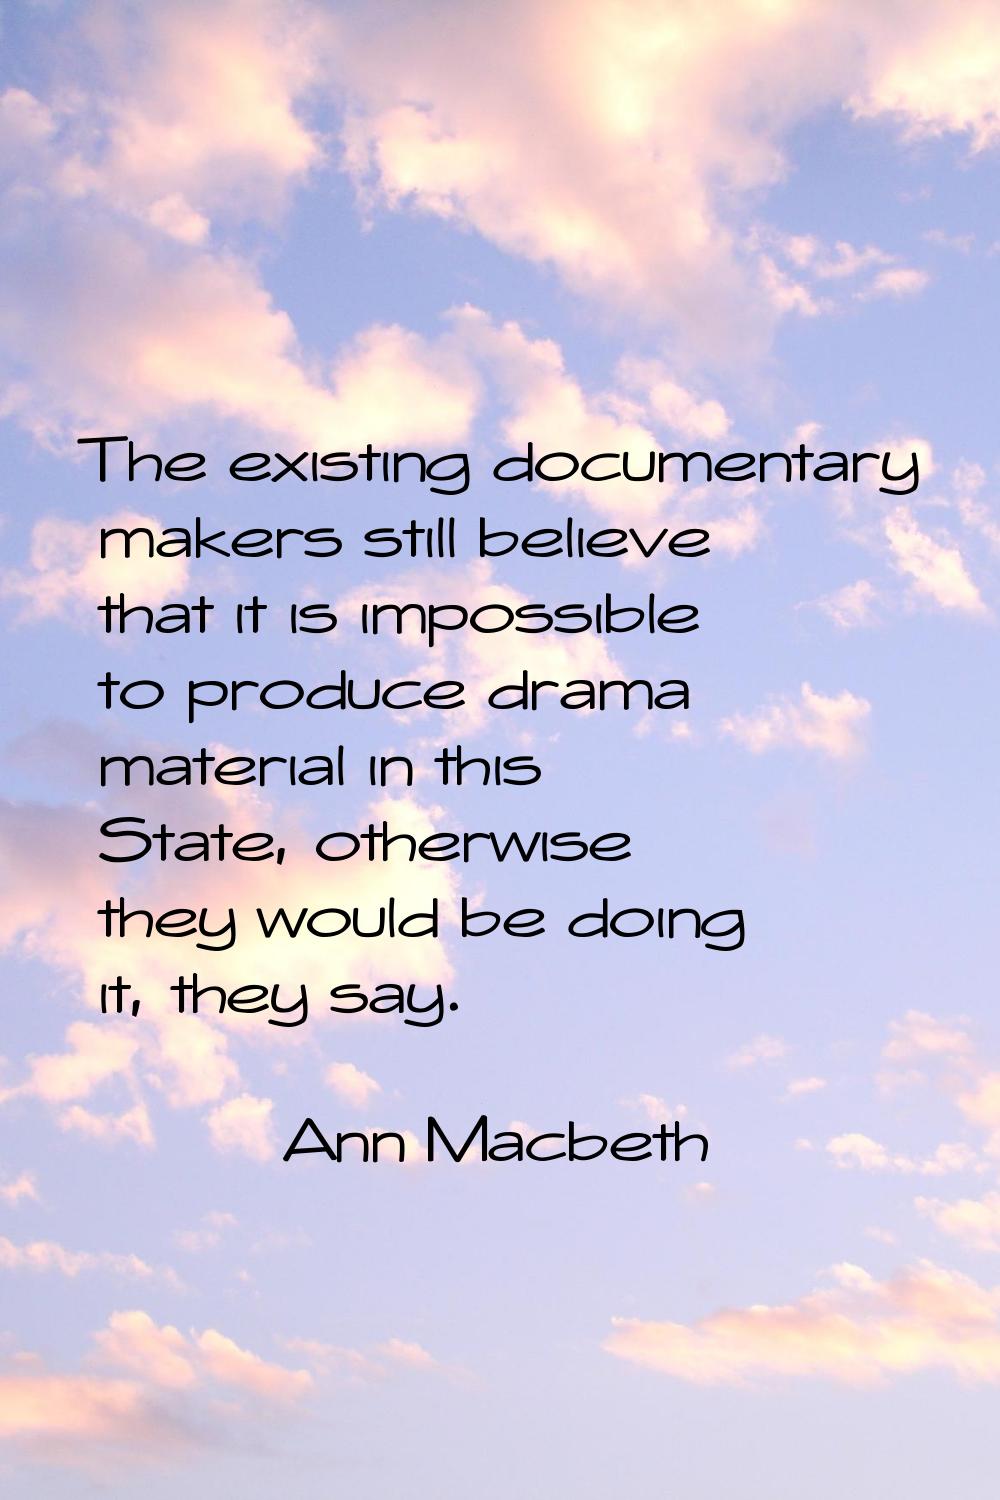 The existing documentary makers still believe that it is impossible to produce drama material in th